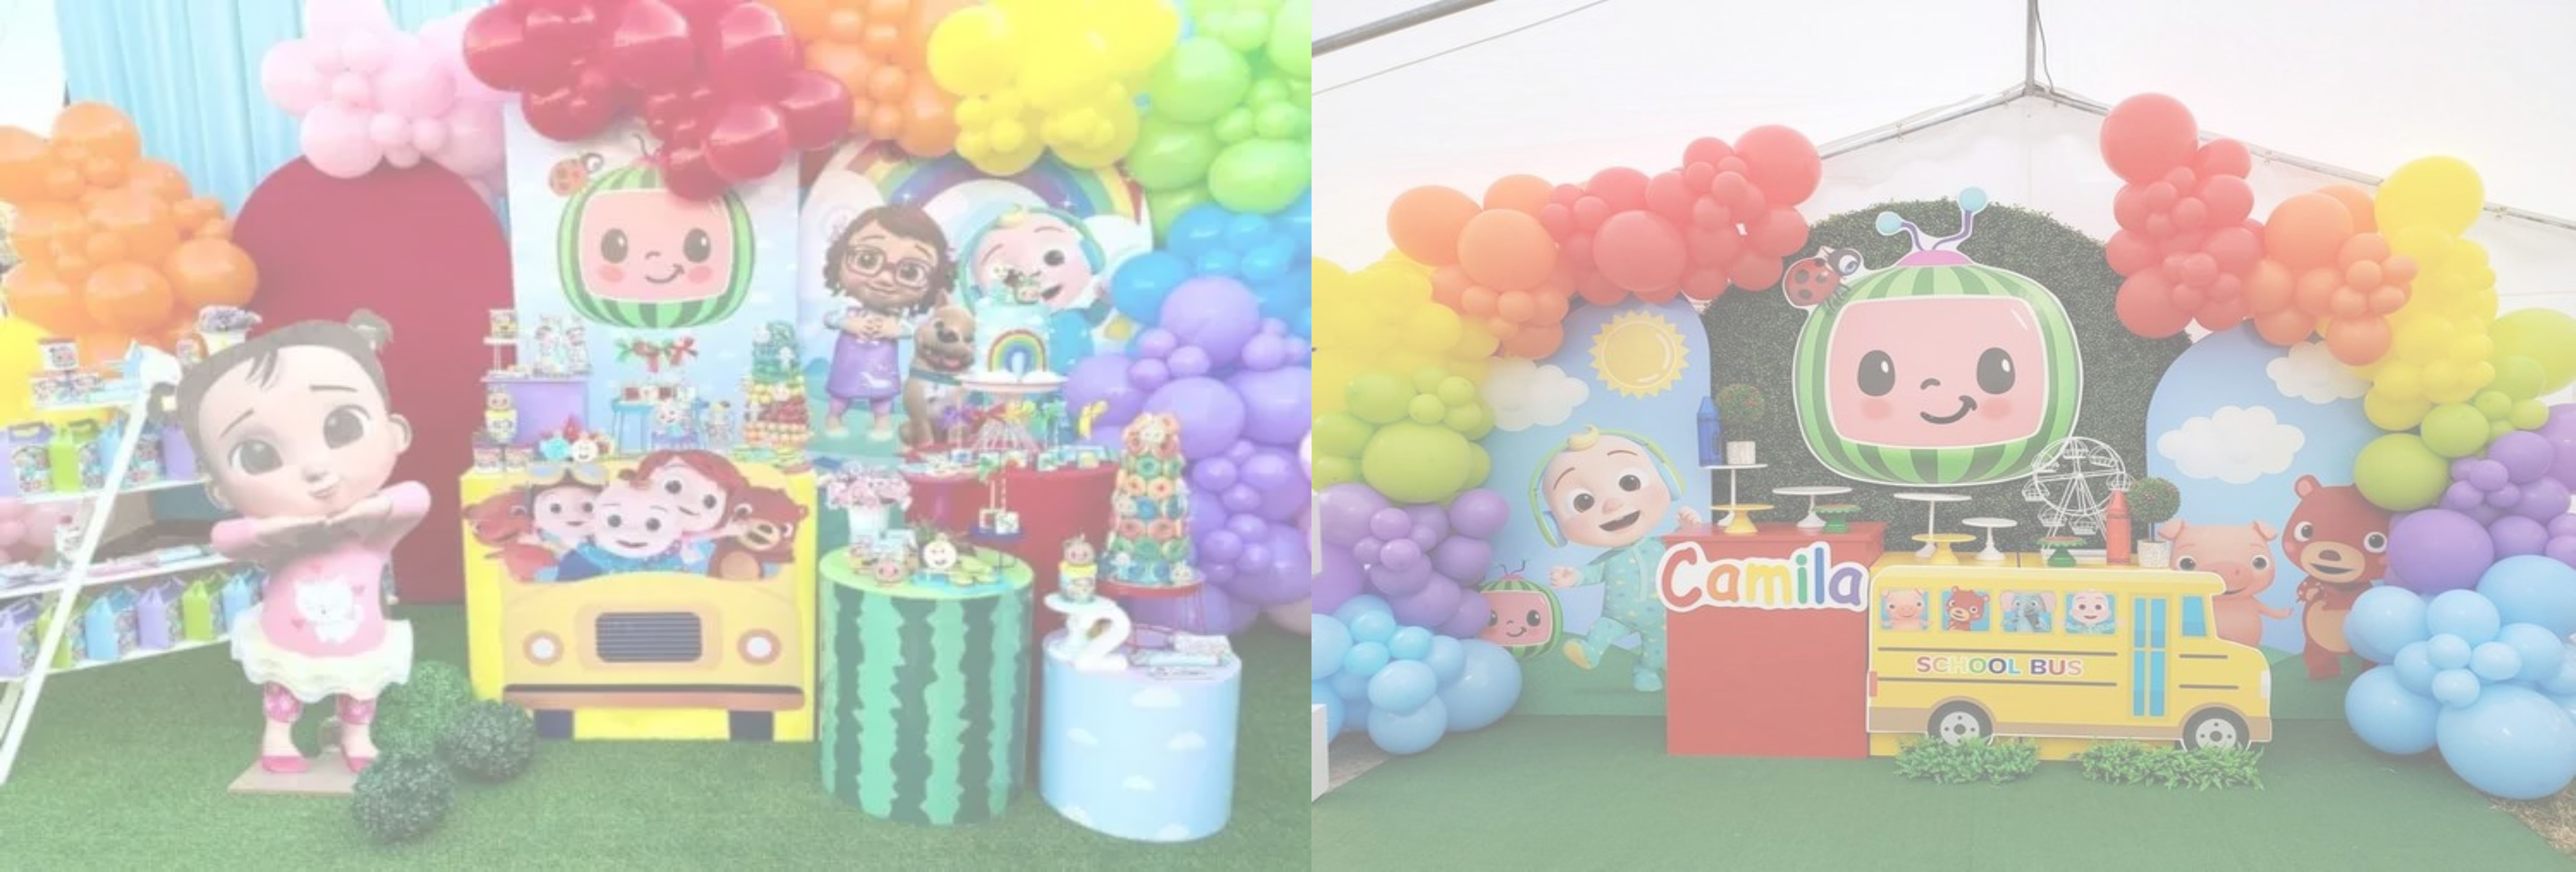 
cocomelon 1st birthday Party decorations